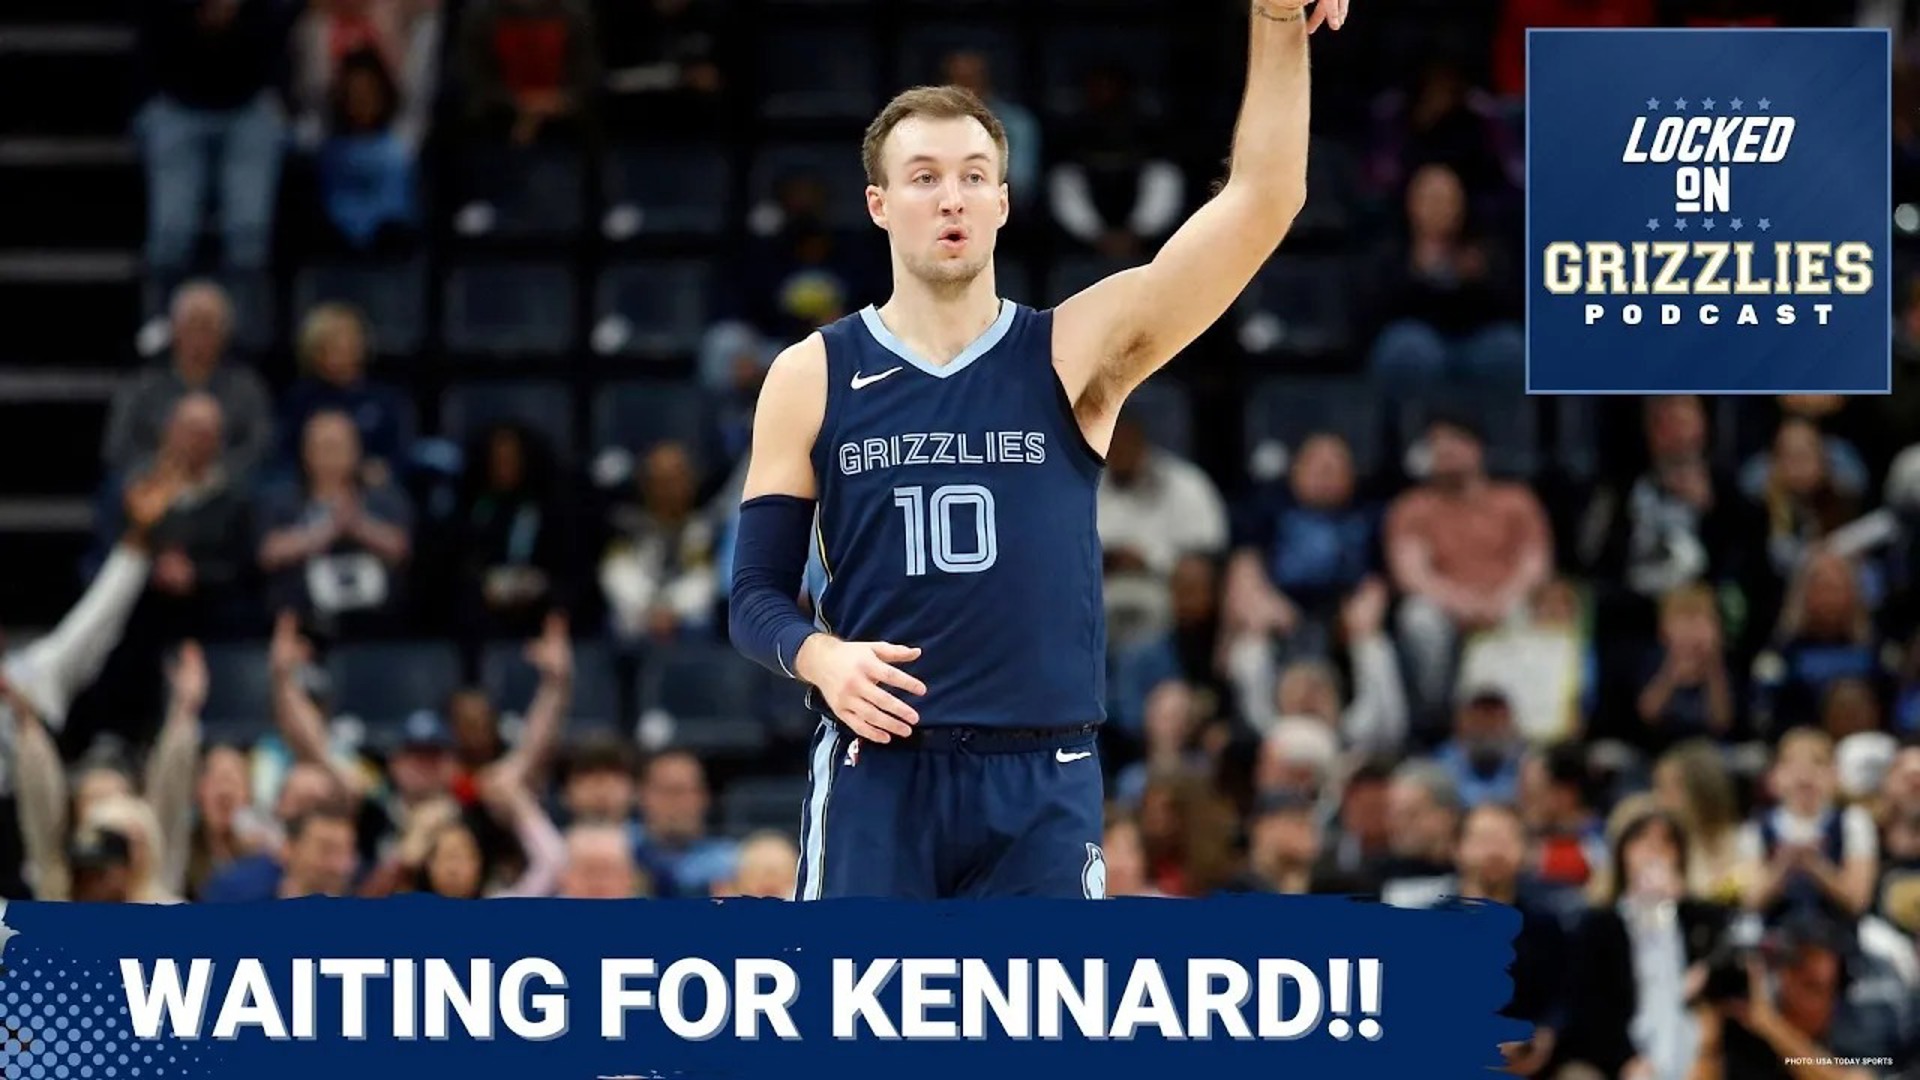 The rumor mill this free agency has skipped the Memphis Grizzlies so far. It's largely assumed Luke Kennard will be back - but he isn't yet.